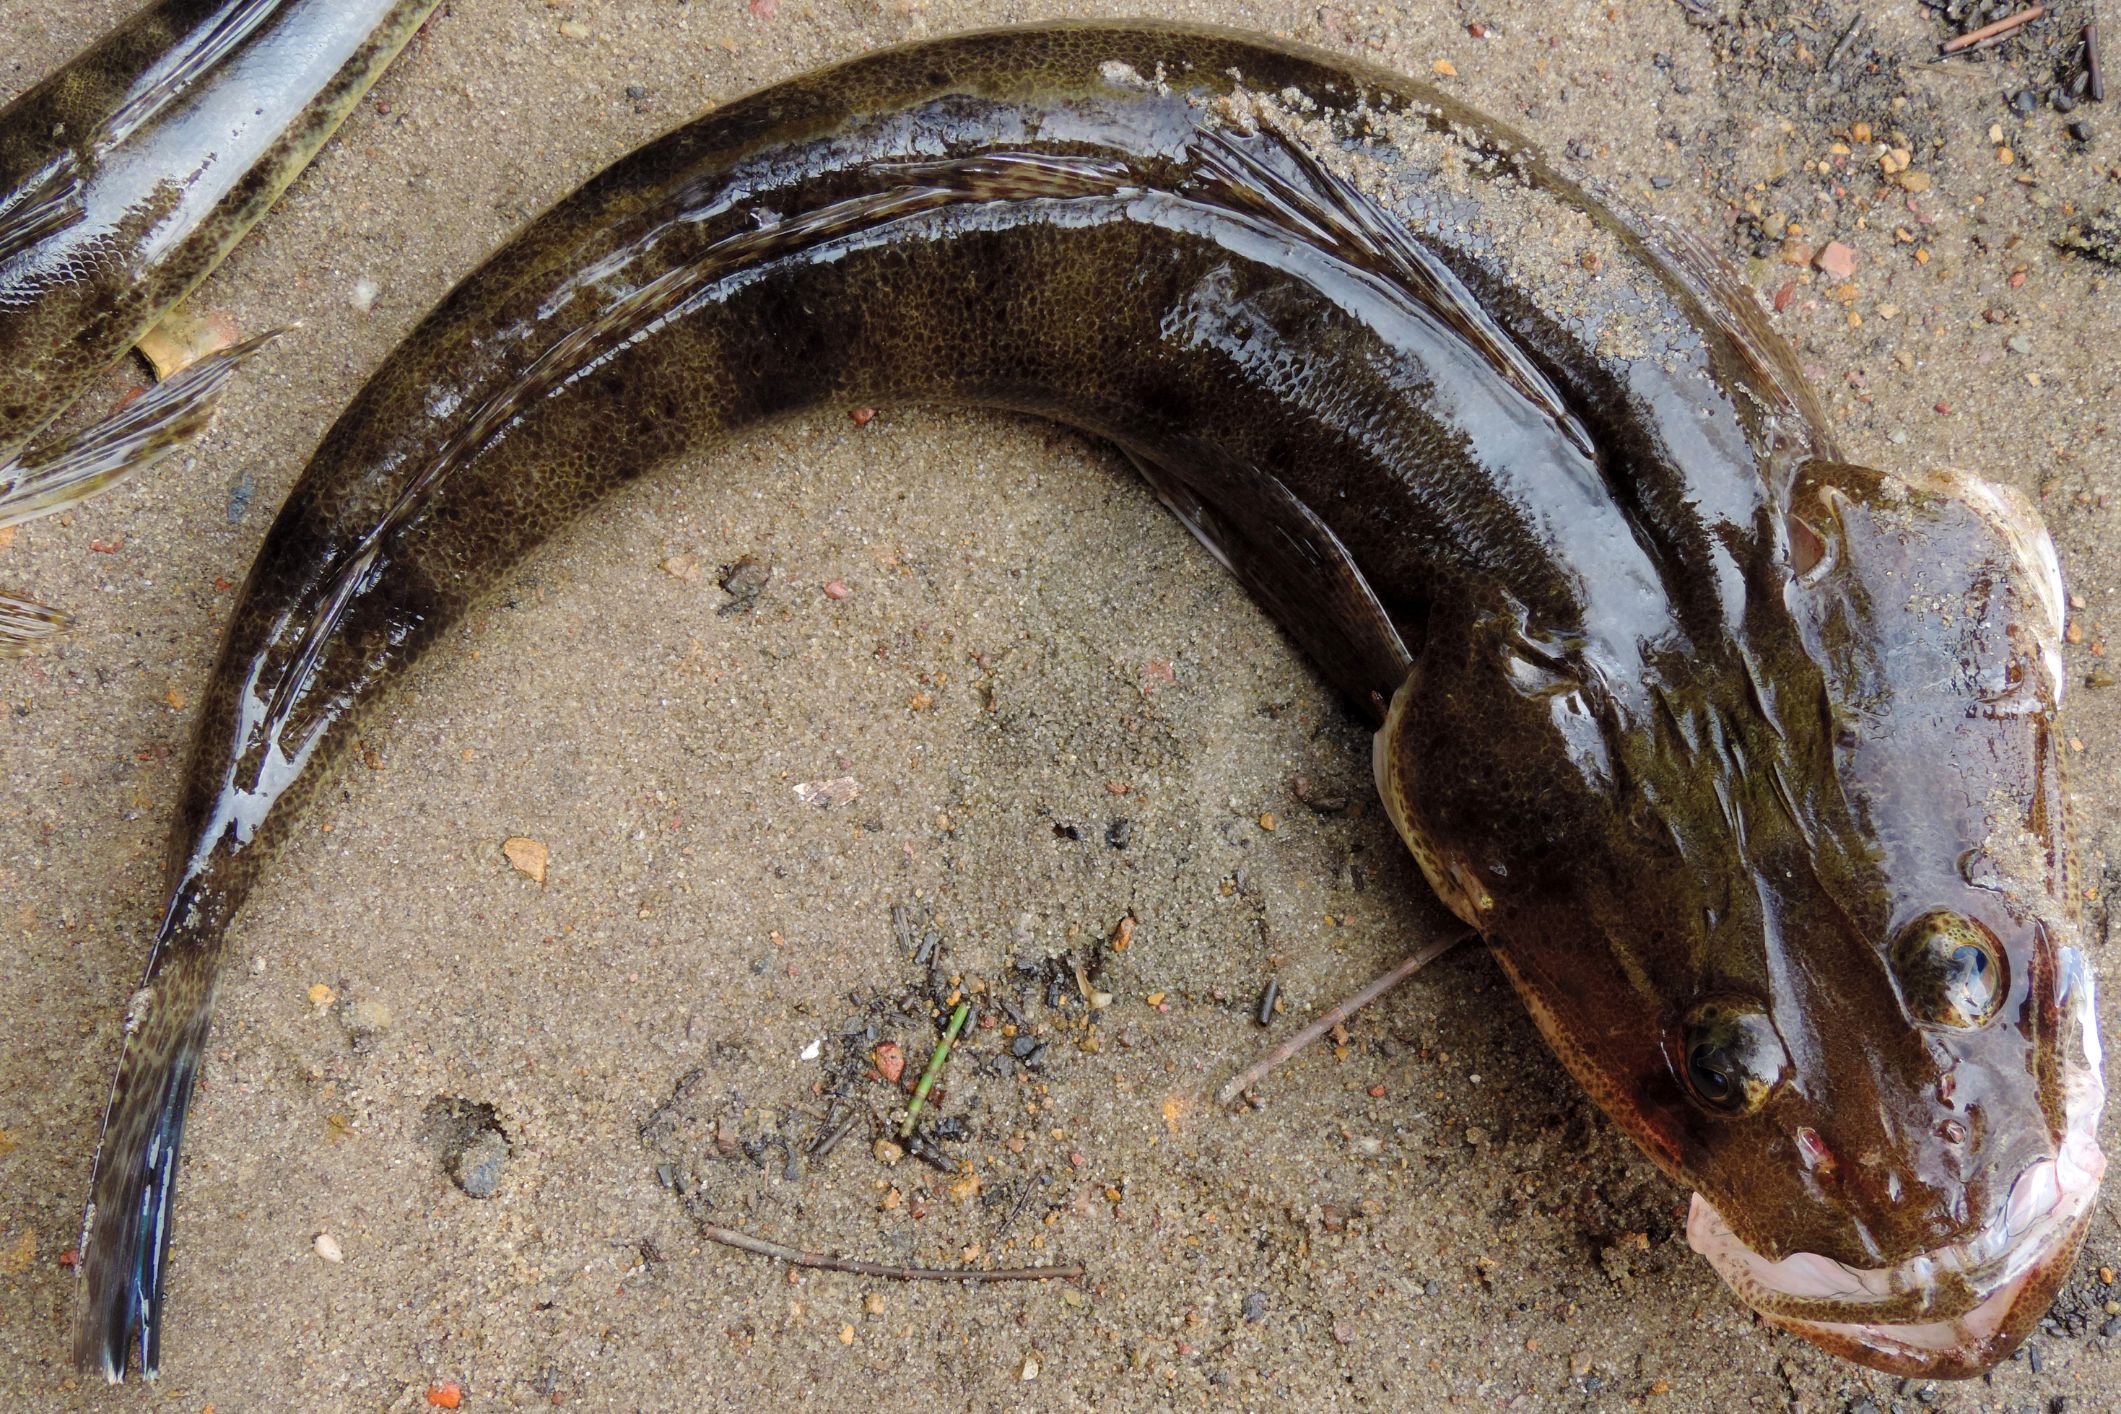 Fishing report: larger flathead showing up